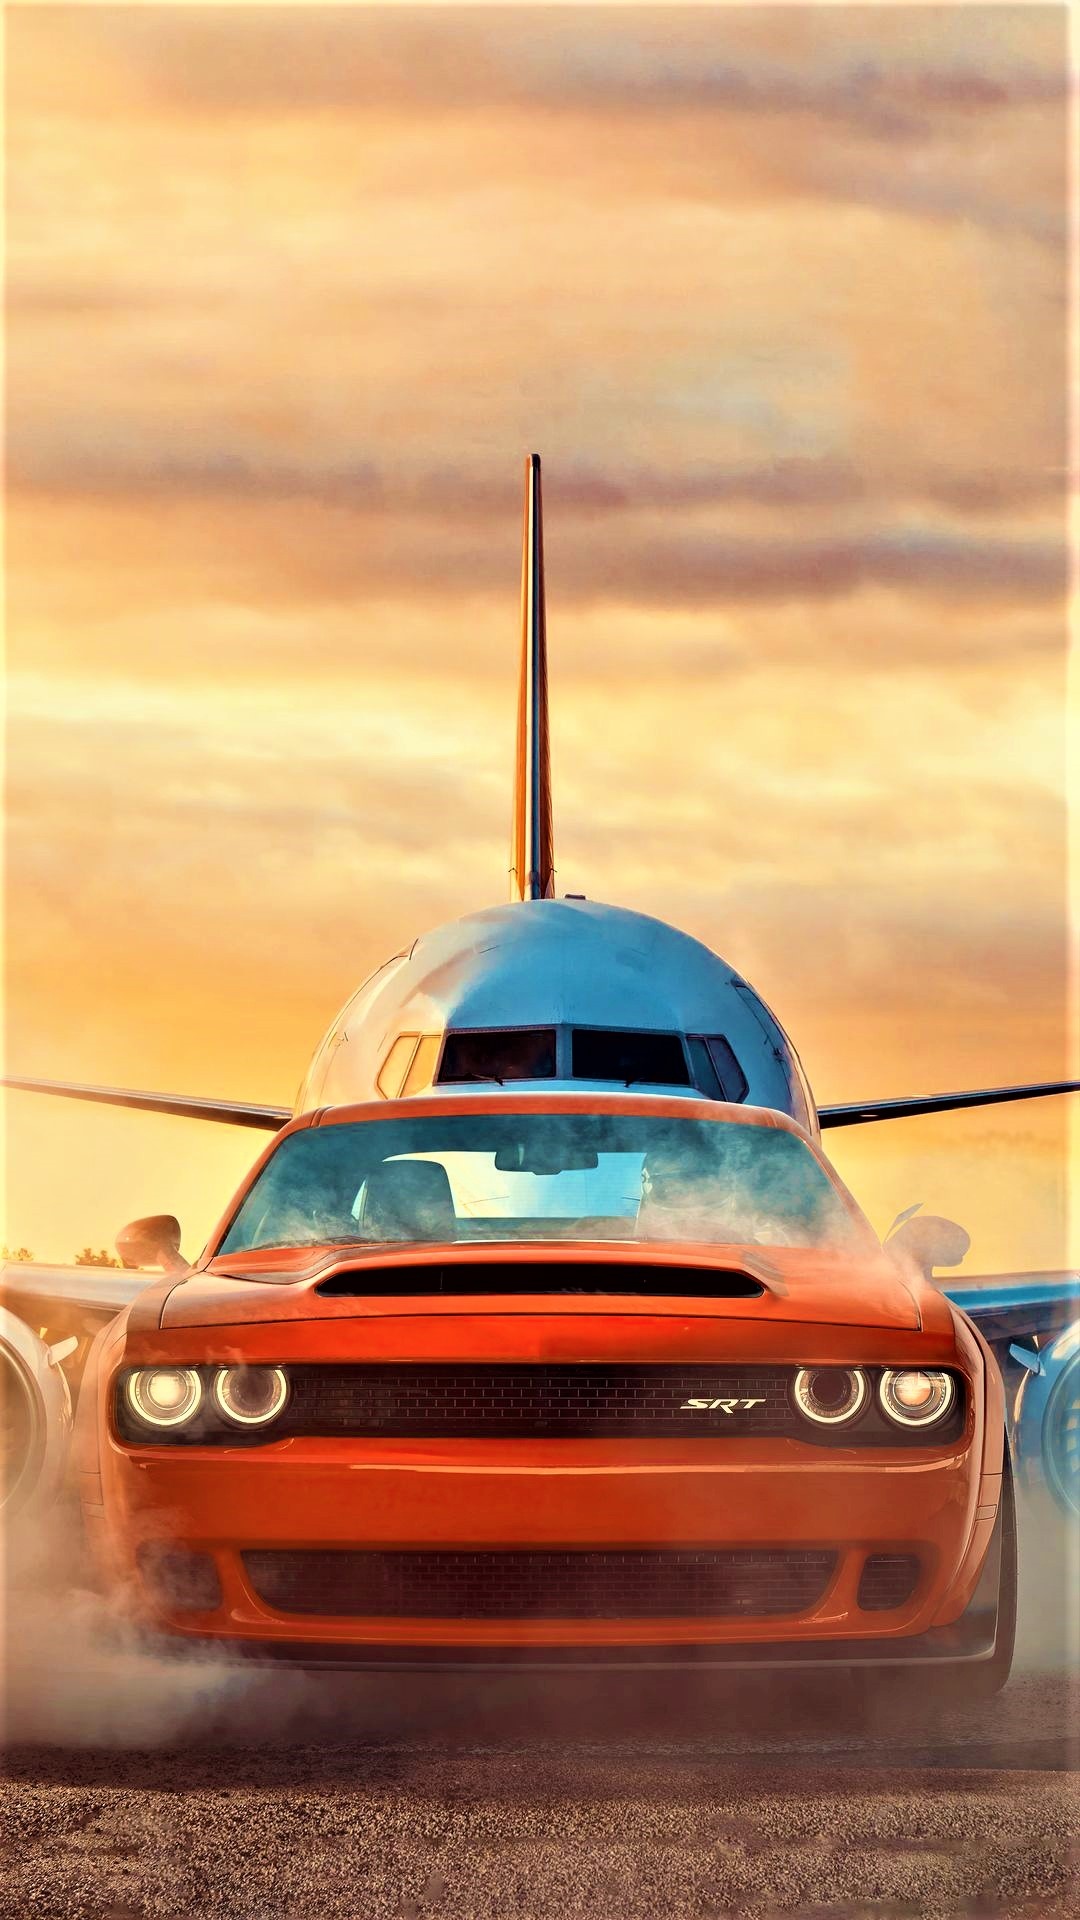 Dodge wallpapers, High-performance cars, Bold design, Thrilling speed, 1080x1920 Full HD Handy